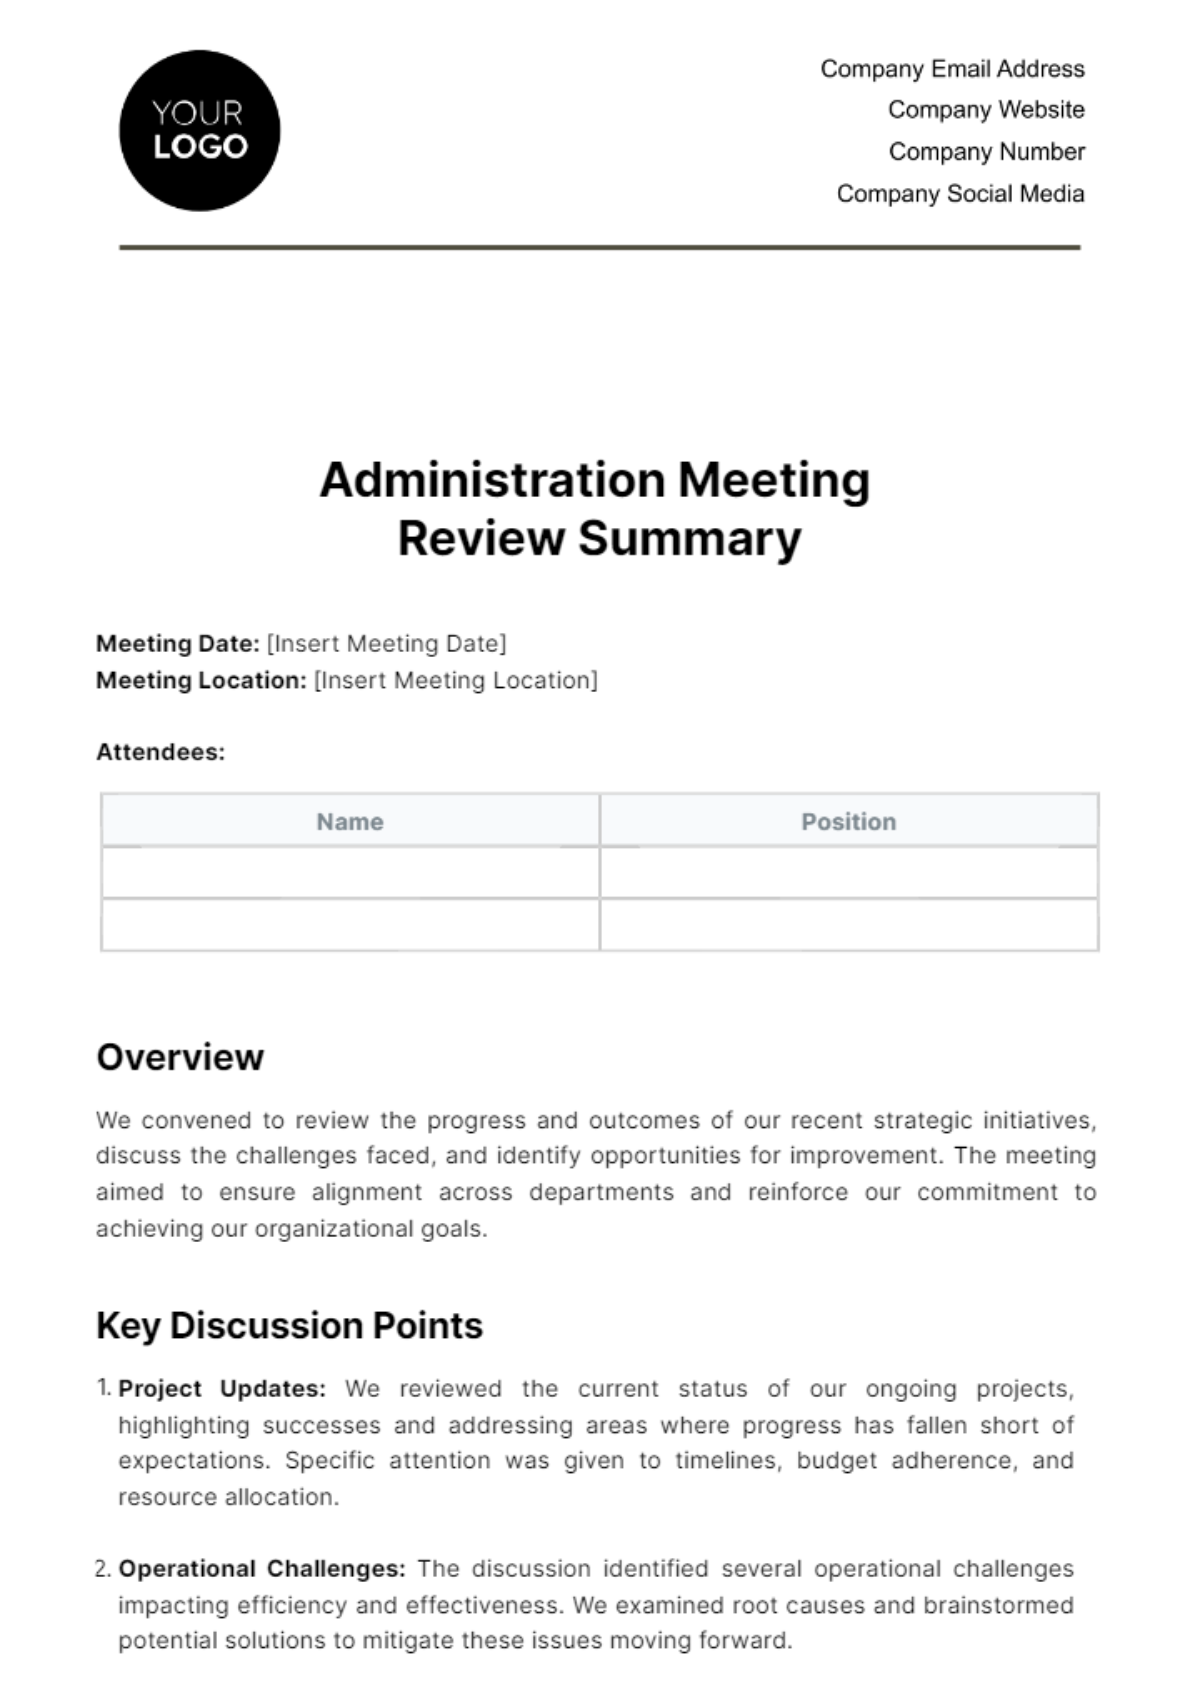 Administration Meeting Review Summary Template